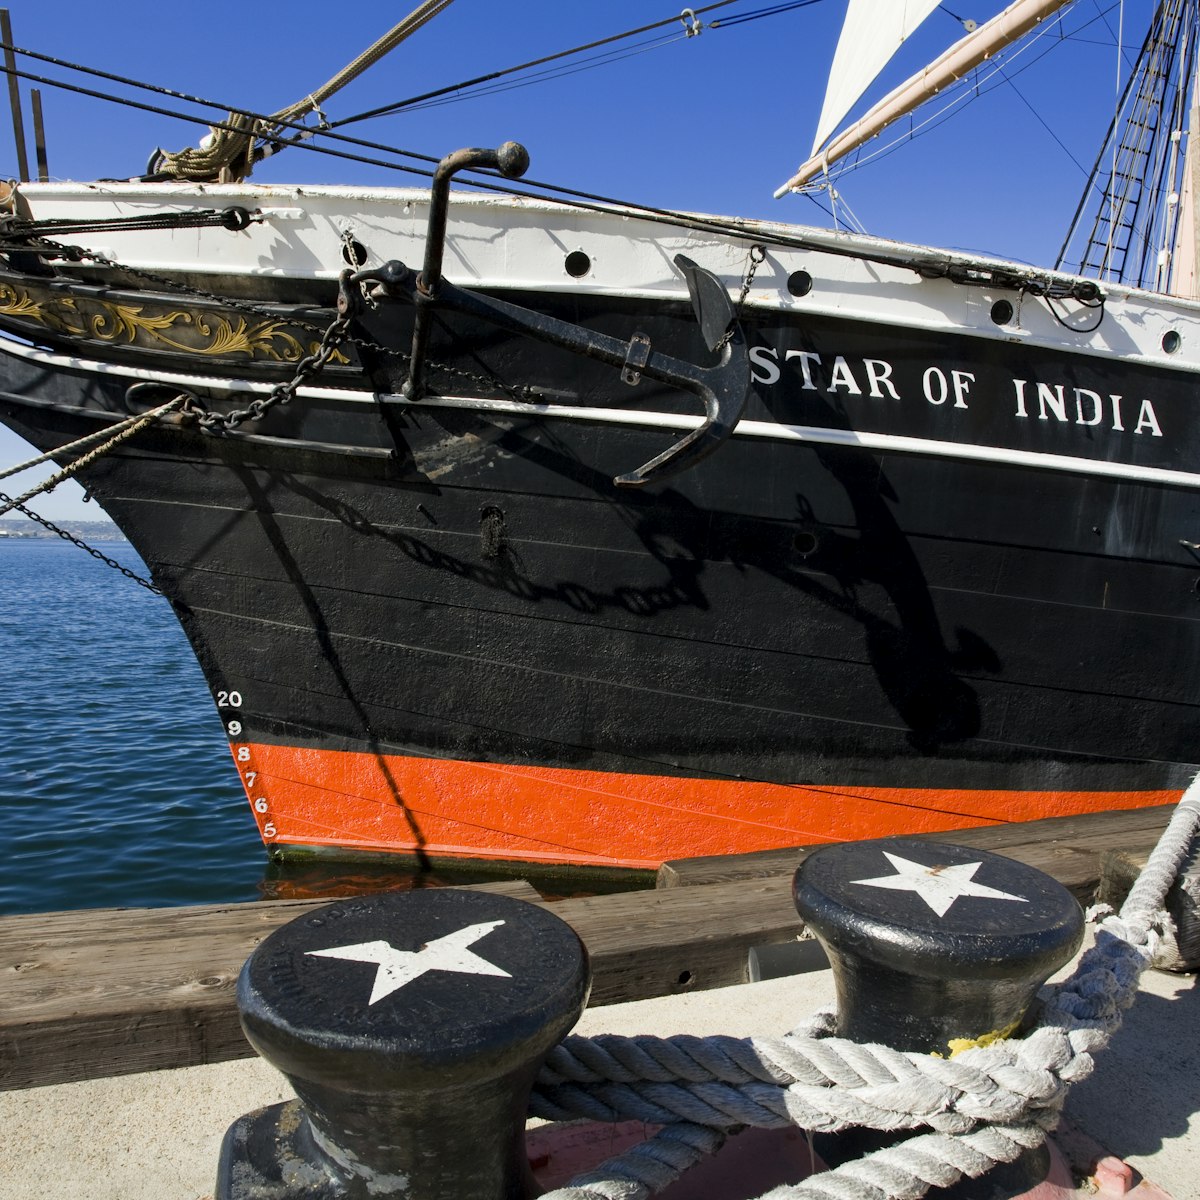 Star of India at the Maritime Museum on the Embarcadero.